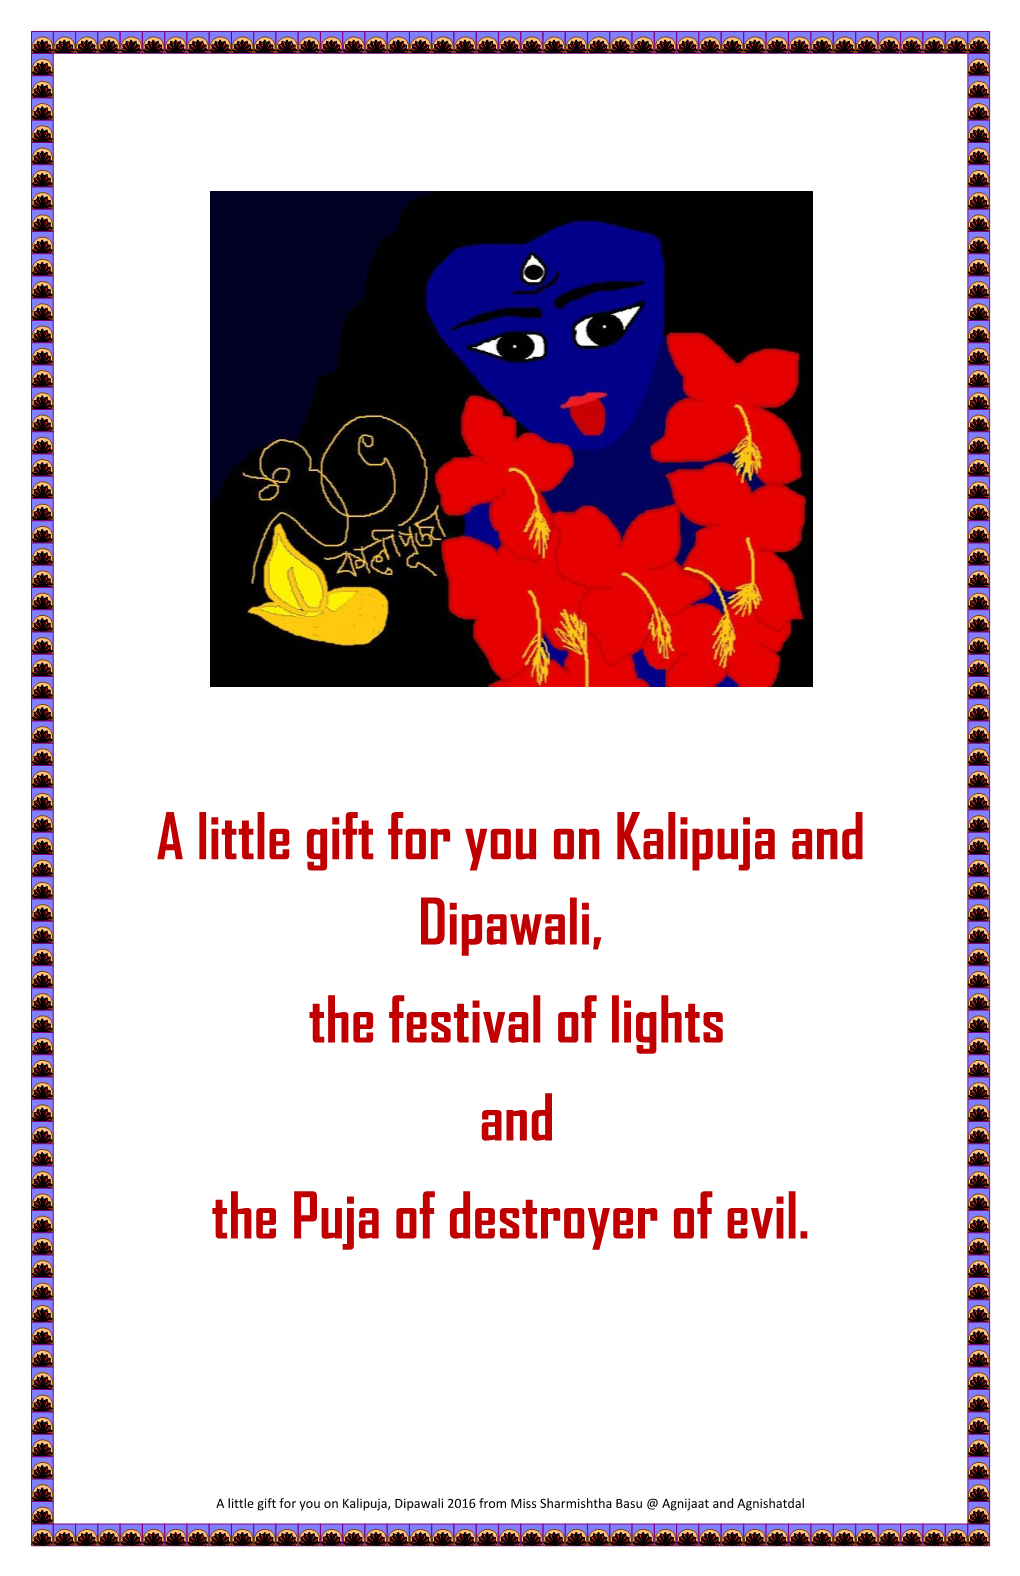 A Little Gift for You on Kalipuja and Dipawali, the Festival of Lights and the Puja of Destroyer of Evil